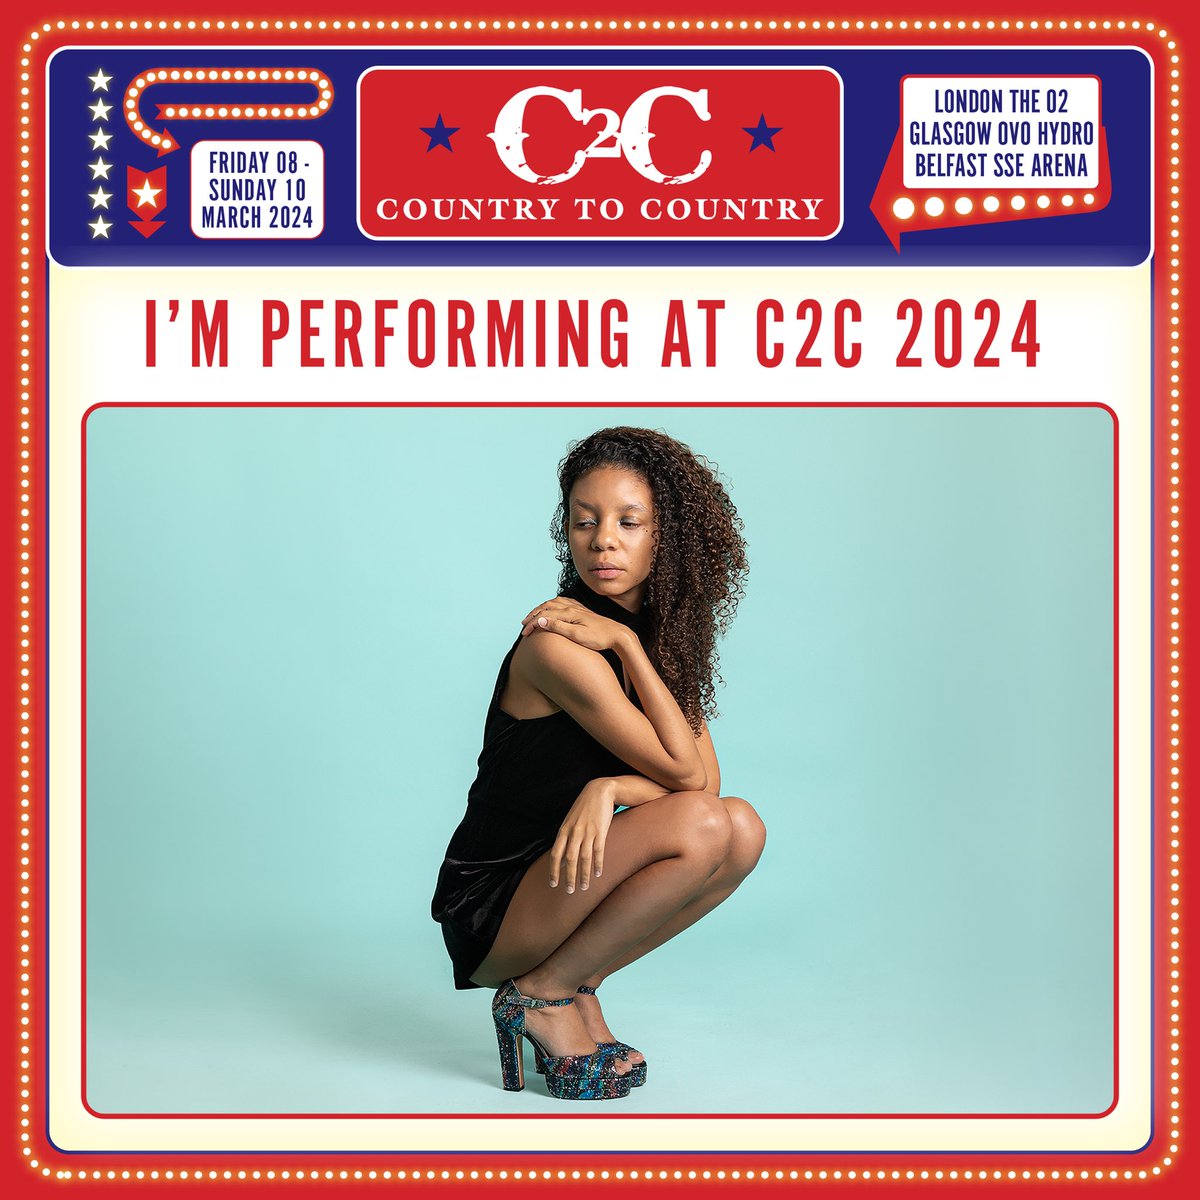 YEE-FUCKIN-HAW. excited to be performing at a number of festival stages over at @C2Cfestival in March. Let’s go girls 🤠